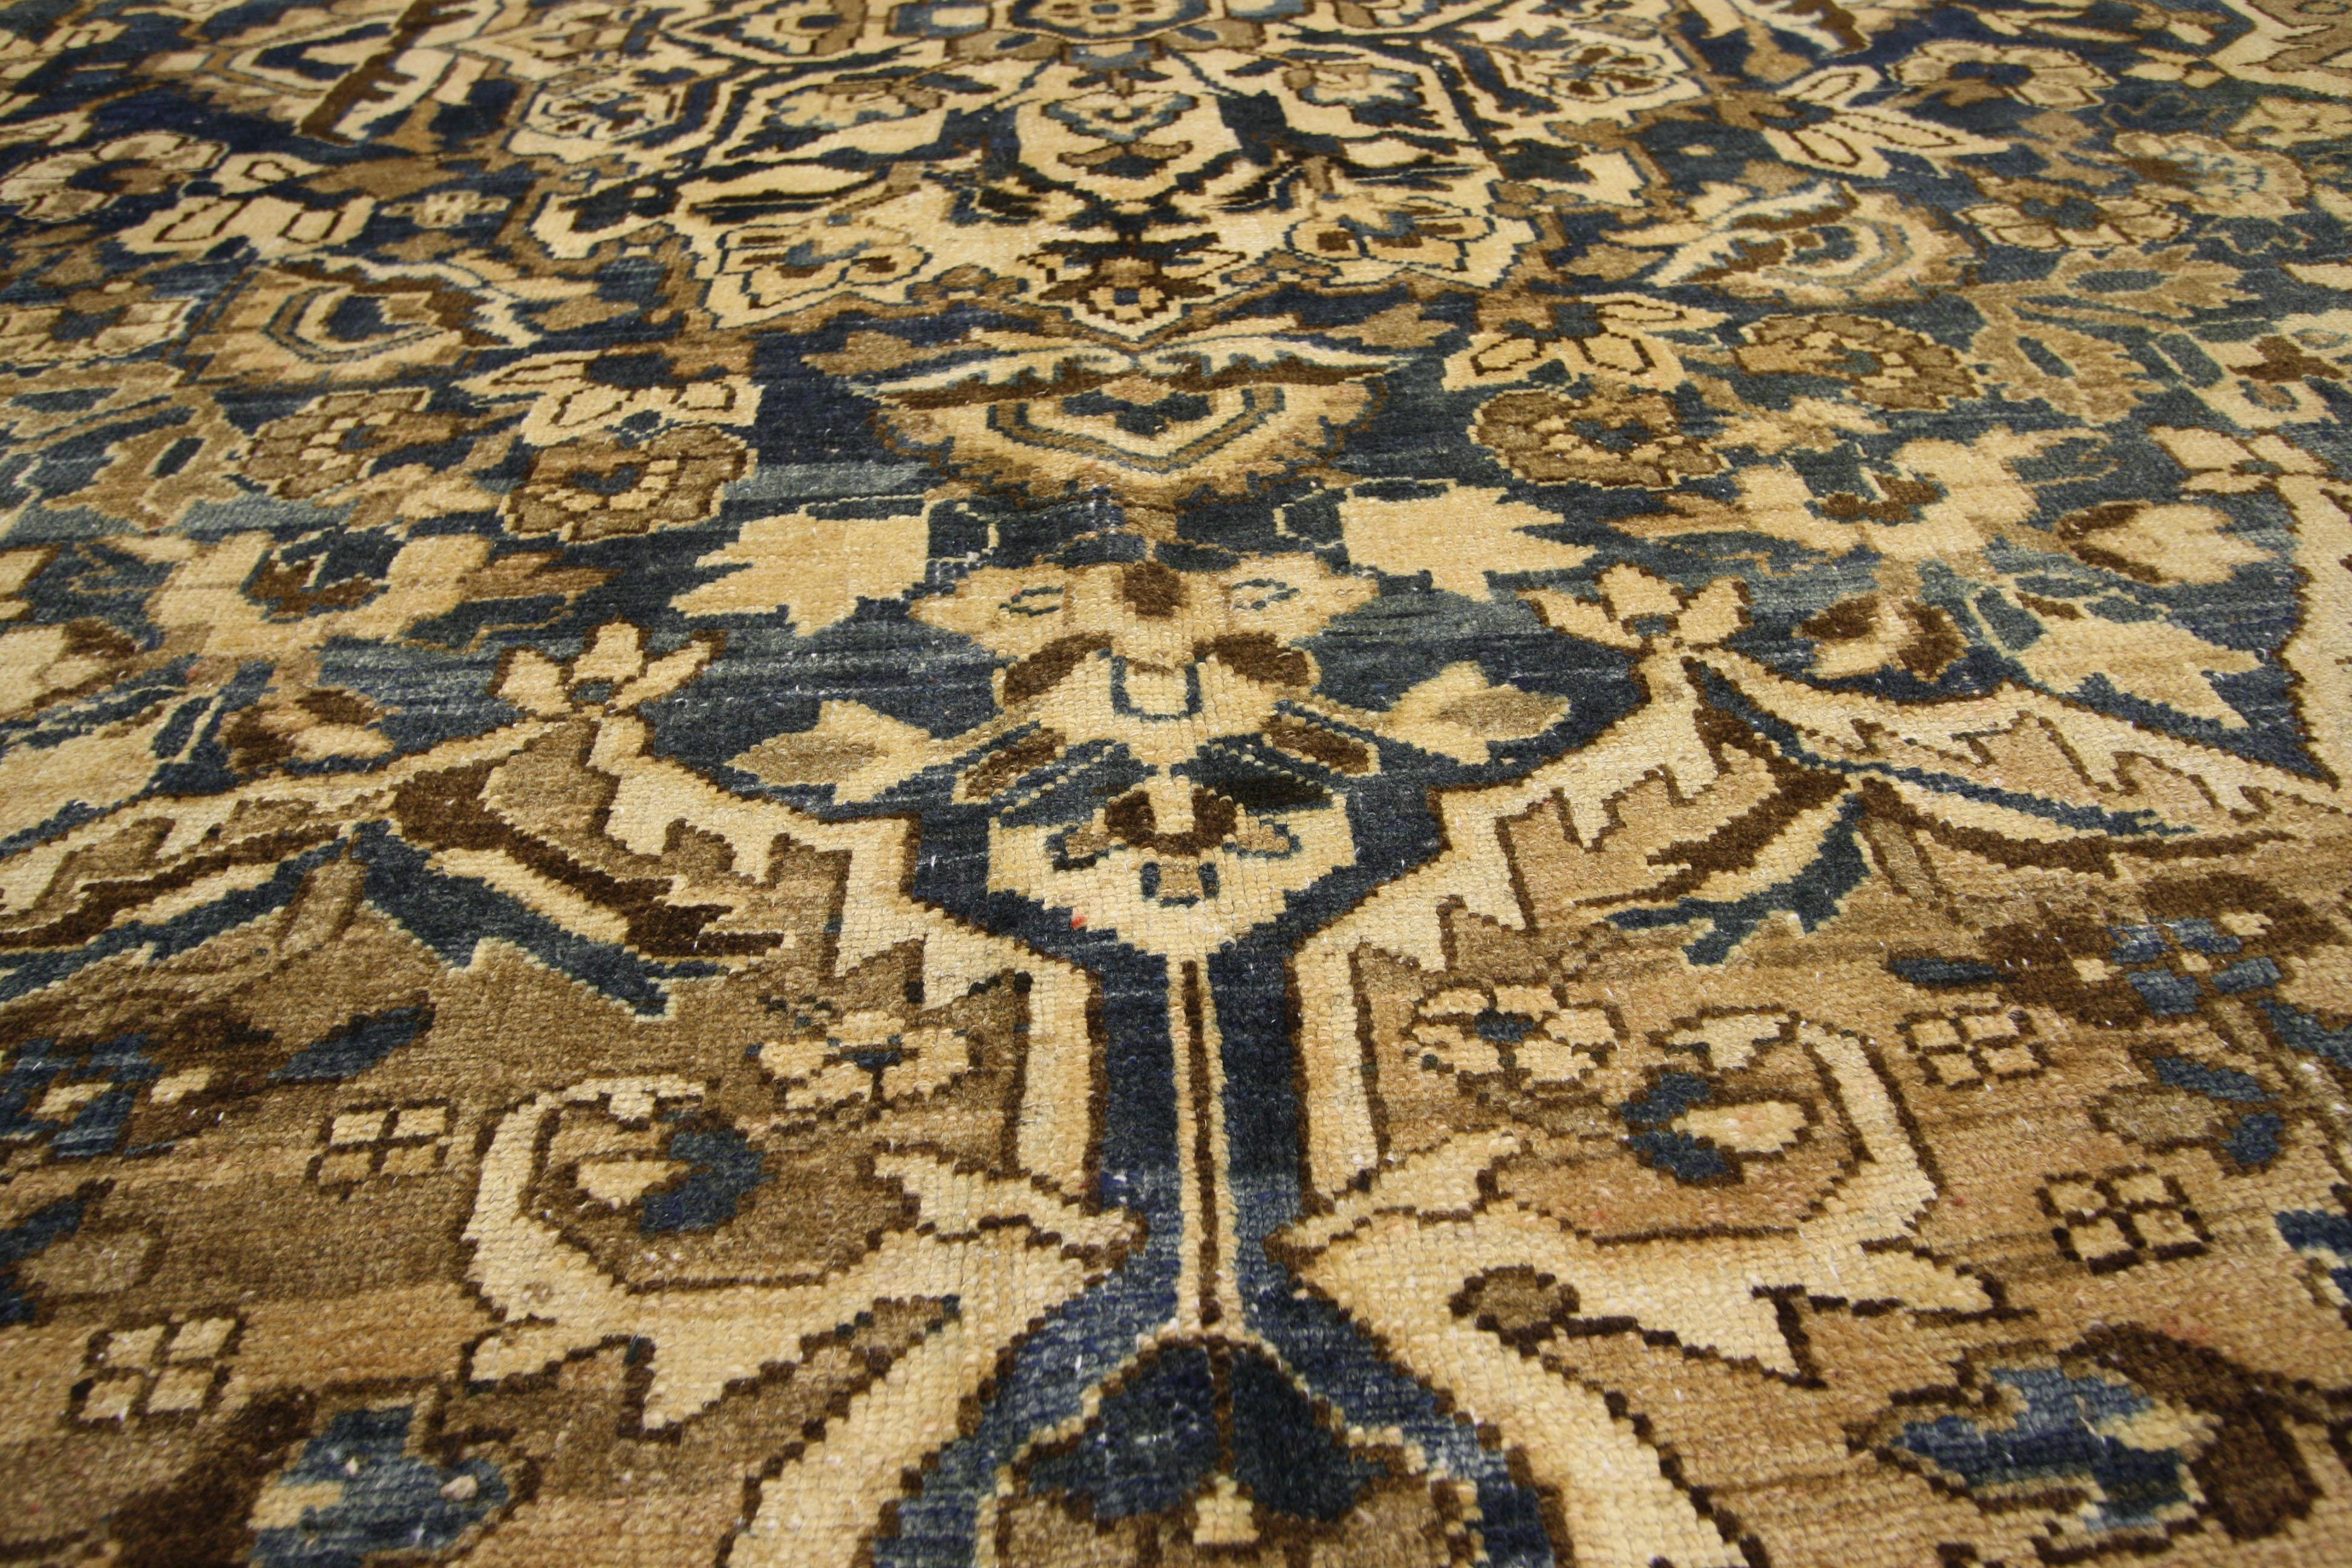 Antique Persian Bakhtiari rug with in traditional modern style. This hand-knotted wool antique Persian Bakhtiari rug features a traditional style. A grandeur 16-point central medallion is covered in a lattice of vines blooming with lotus and